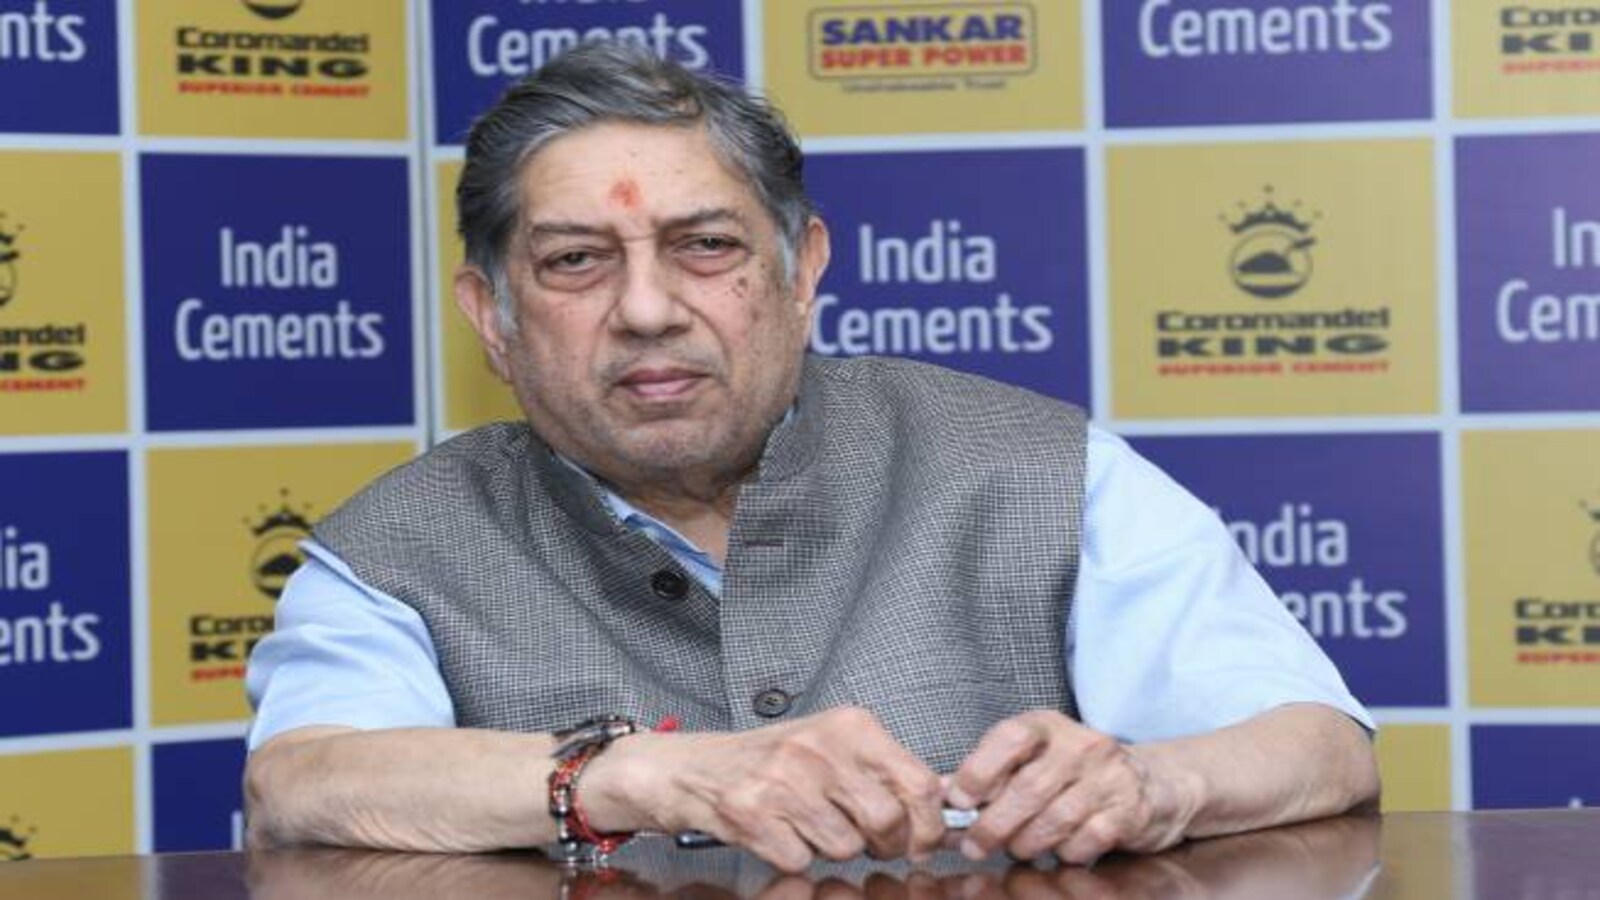 The N Srinivasan Interview India Cements Boss On 75 Year Run Chennai Super Kings Cricket And More